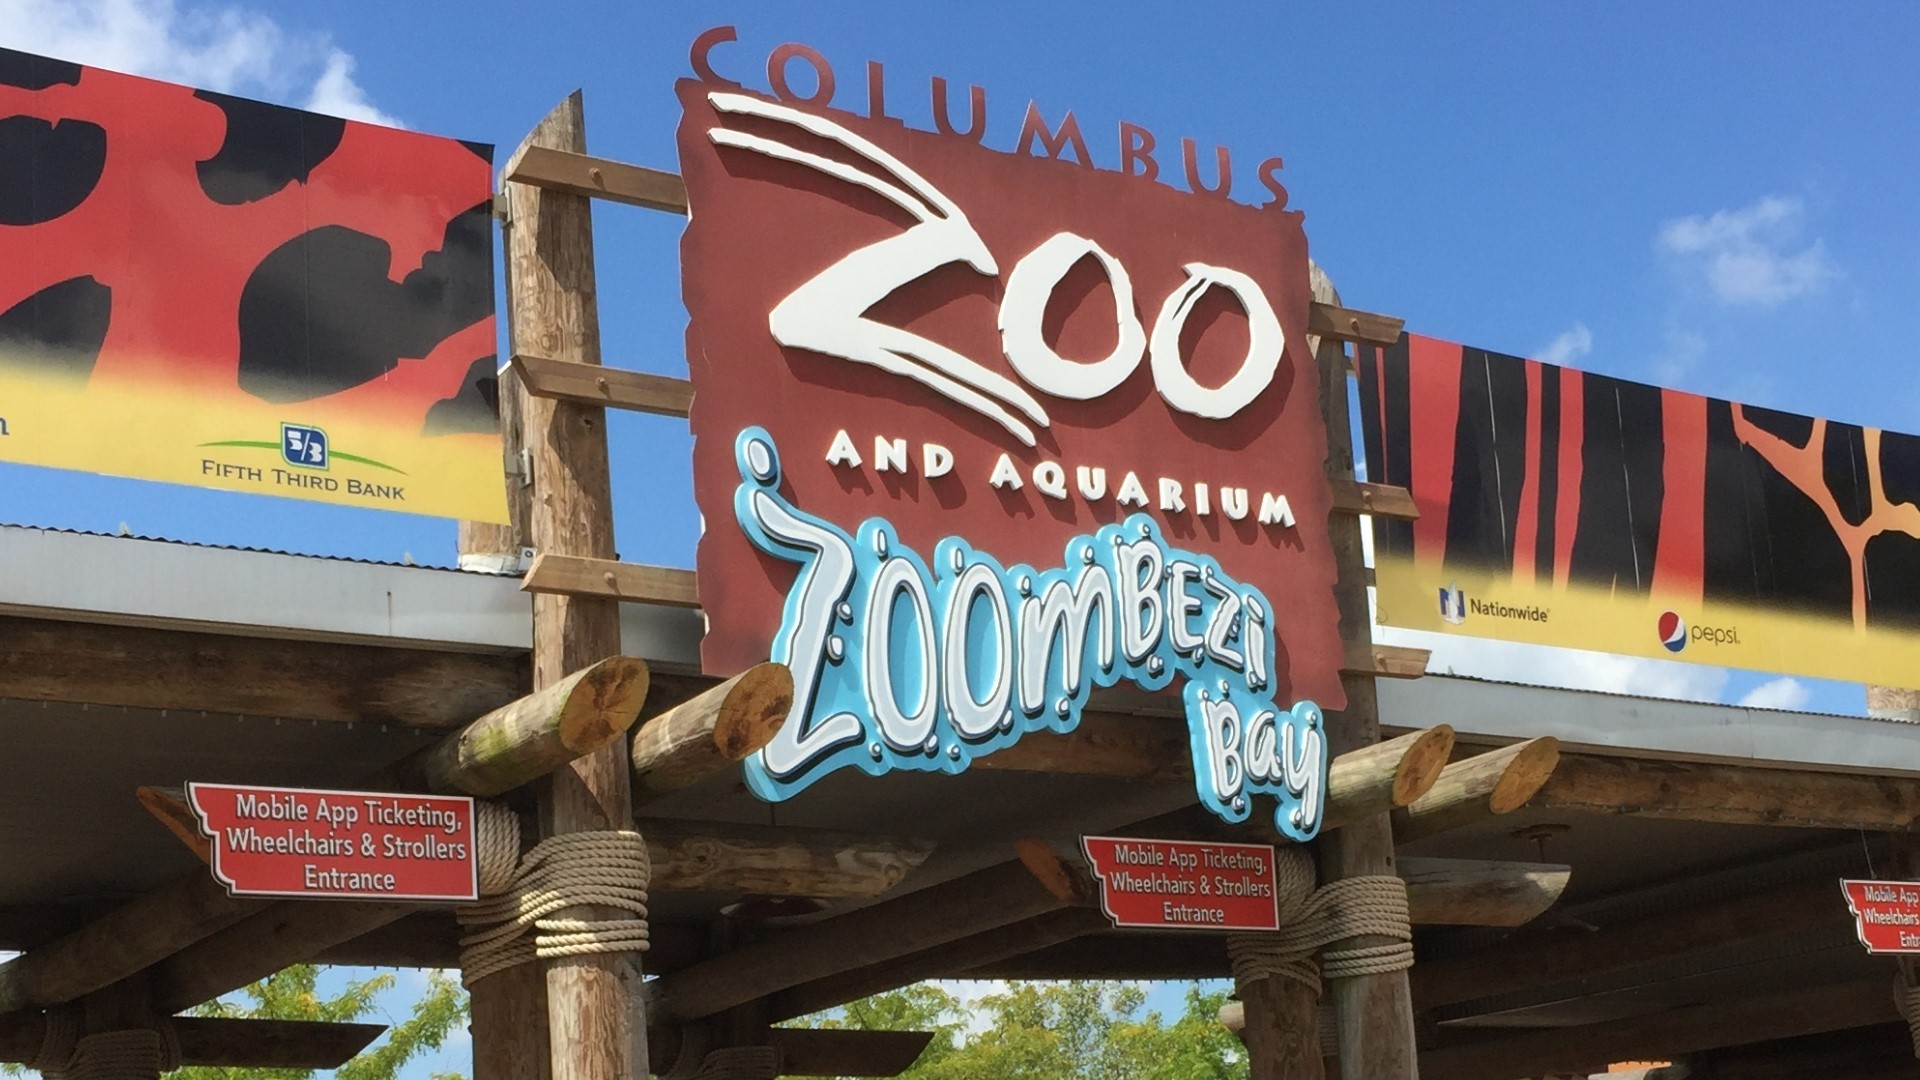 The zoo says the investigation confirmed that public levy funds, which the zoo receives to care for its animals, were not misused.